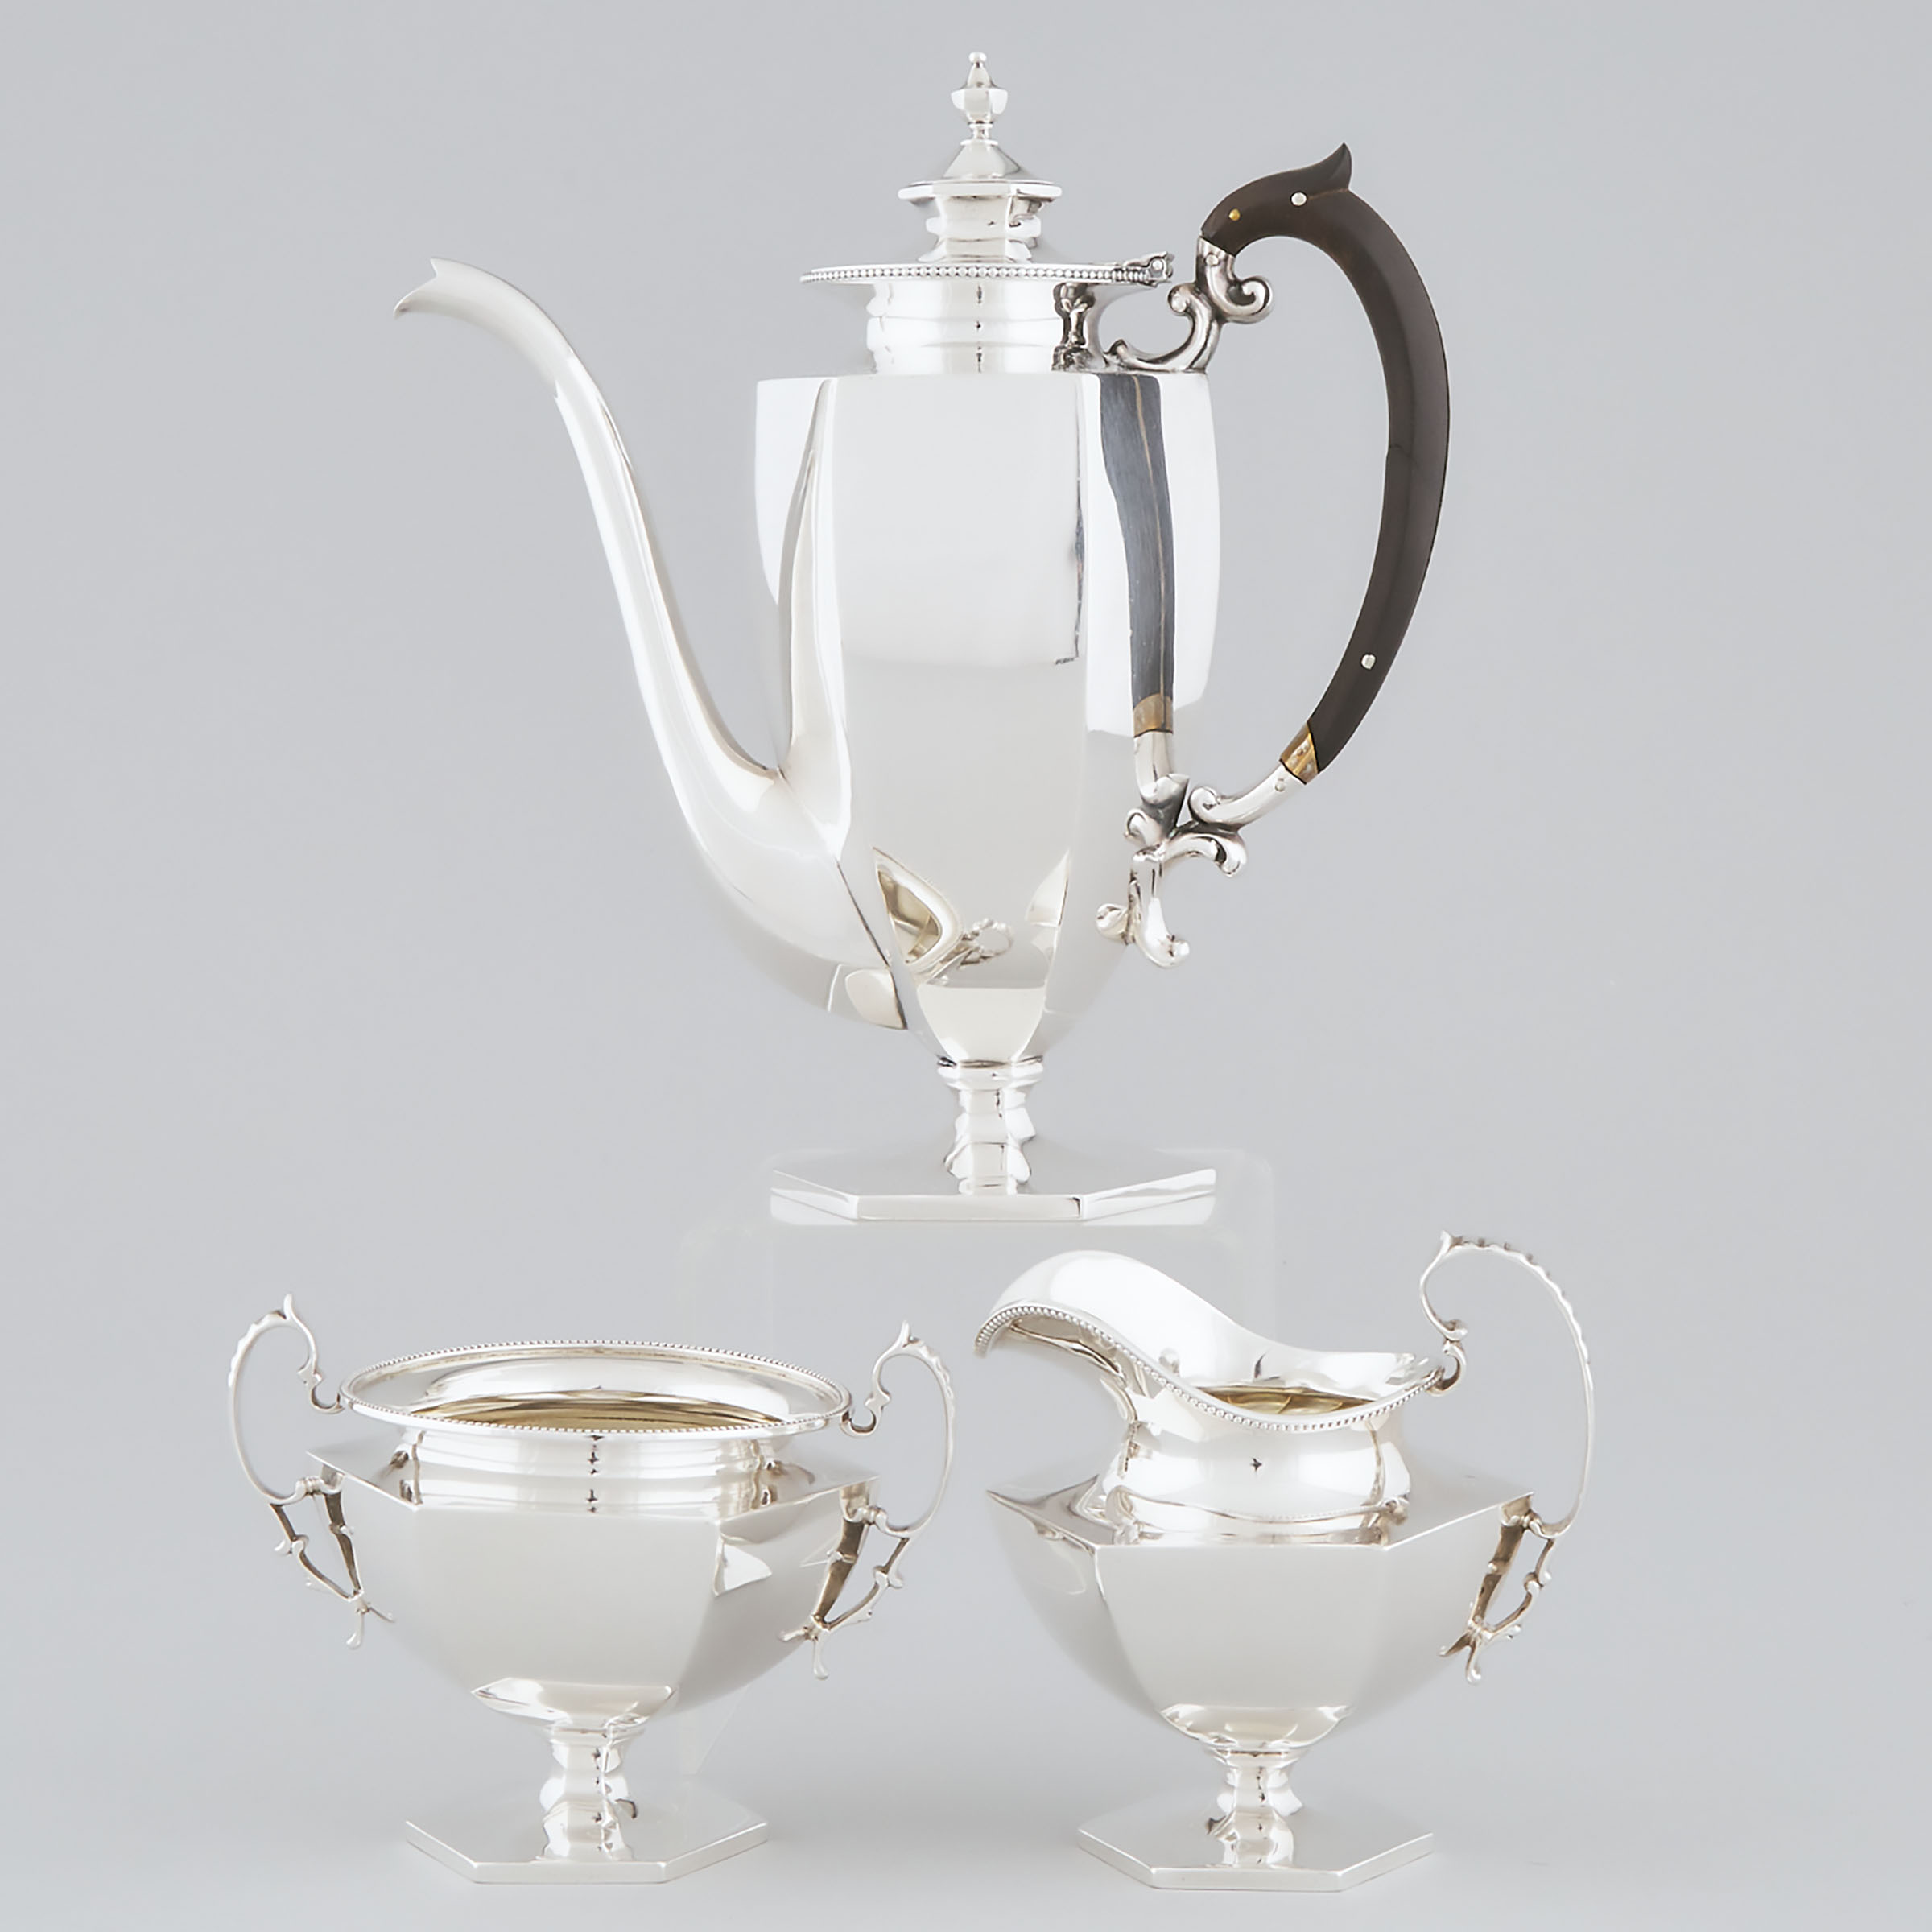 American Silver Coffee Service, Howard Sterling Co., Providence, R.I., early 20th century